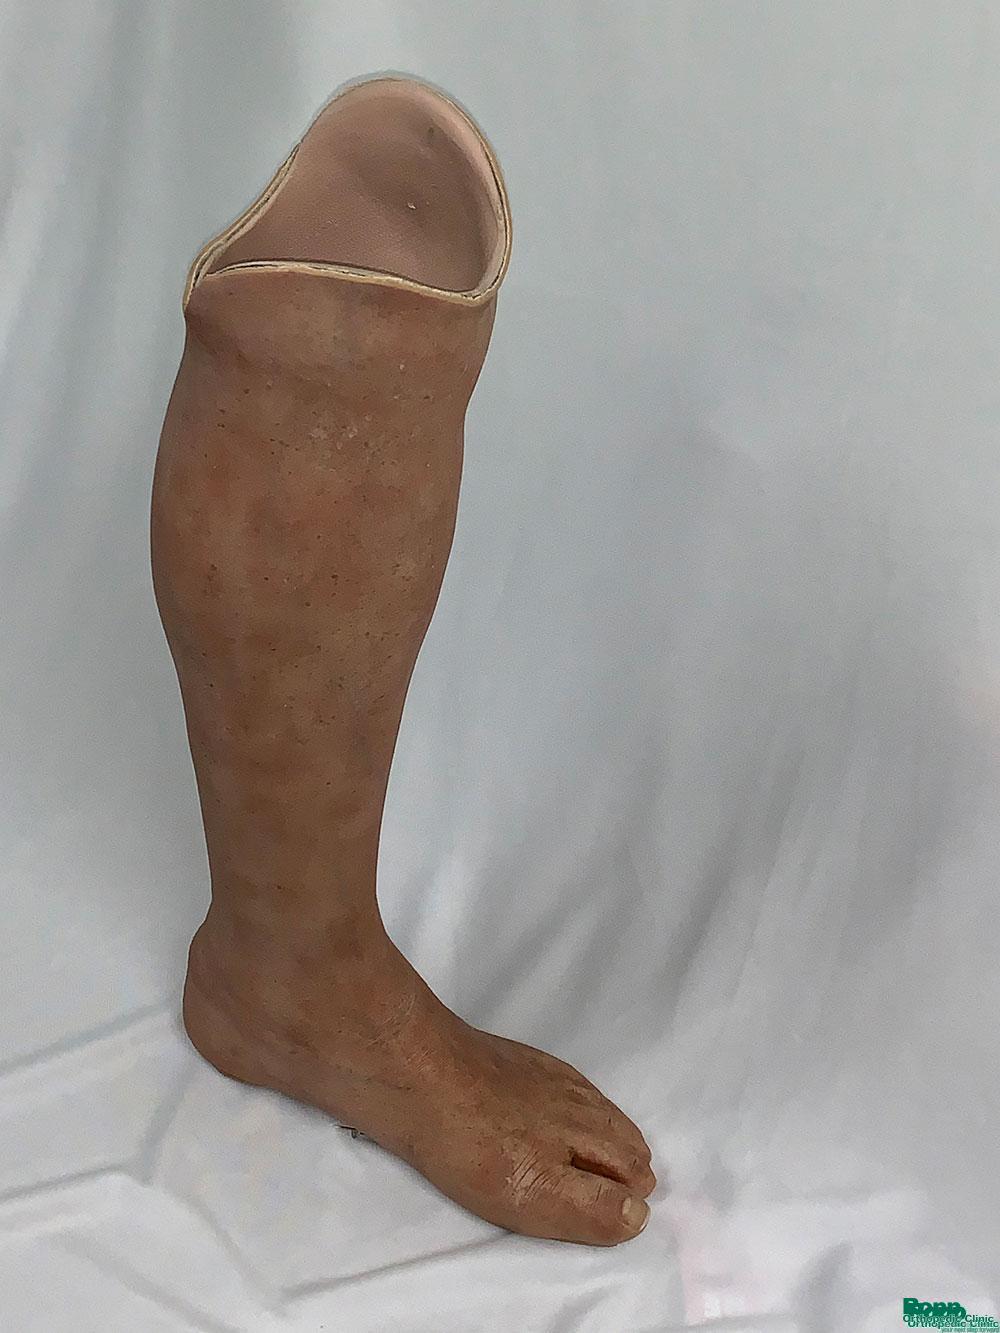 Custom silicone skin for a prosthetic.